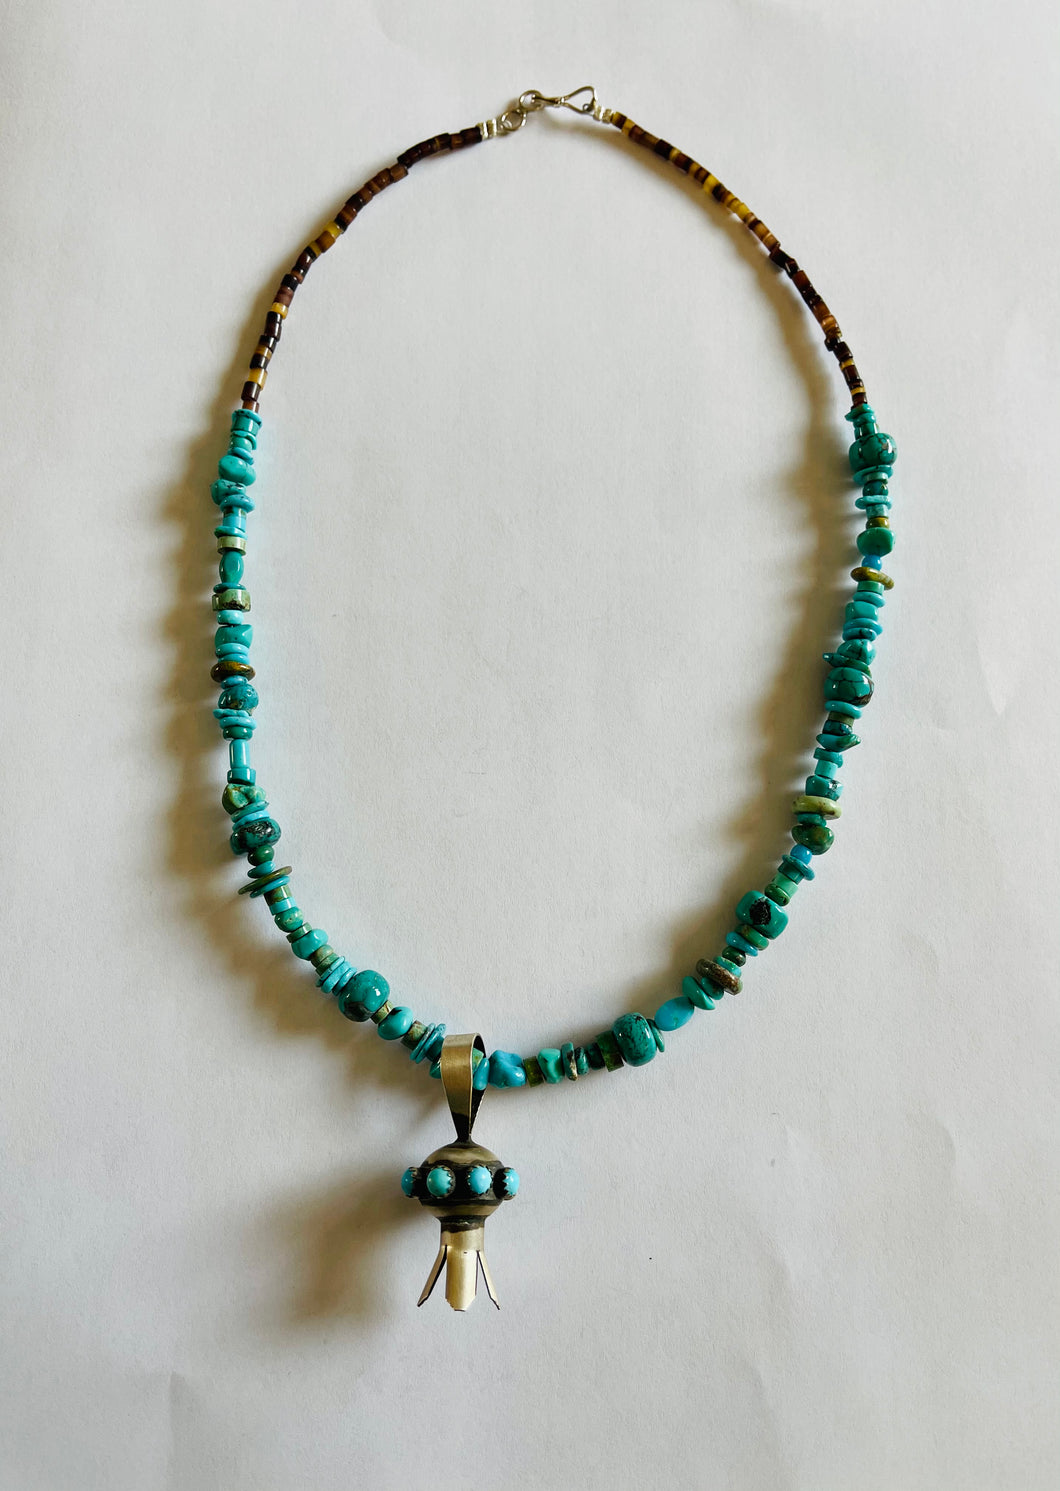 Vintage Beaded Blossom Necklace